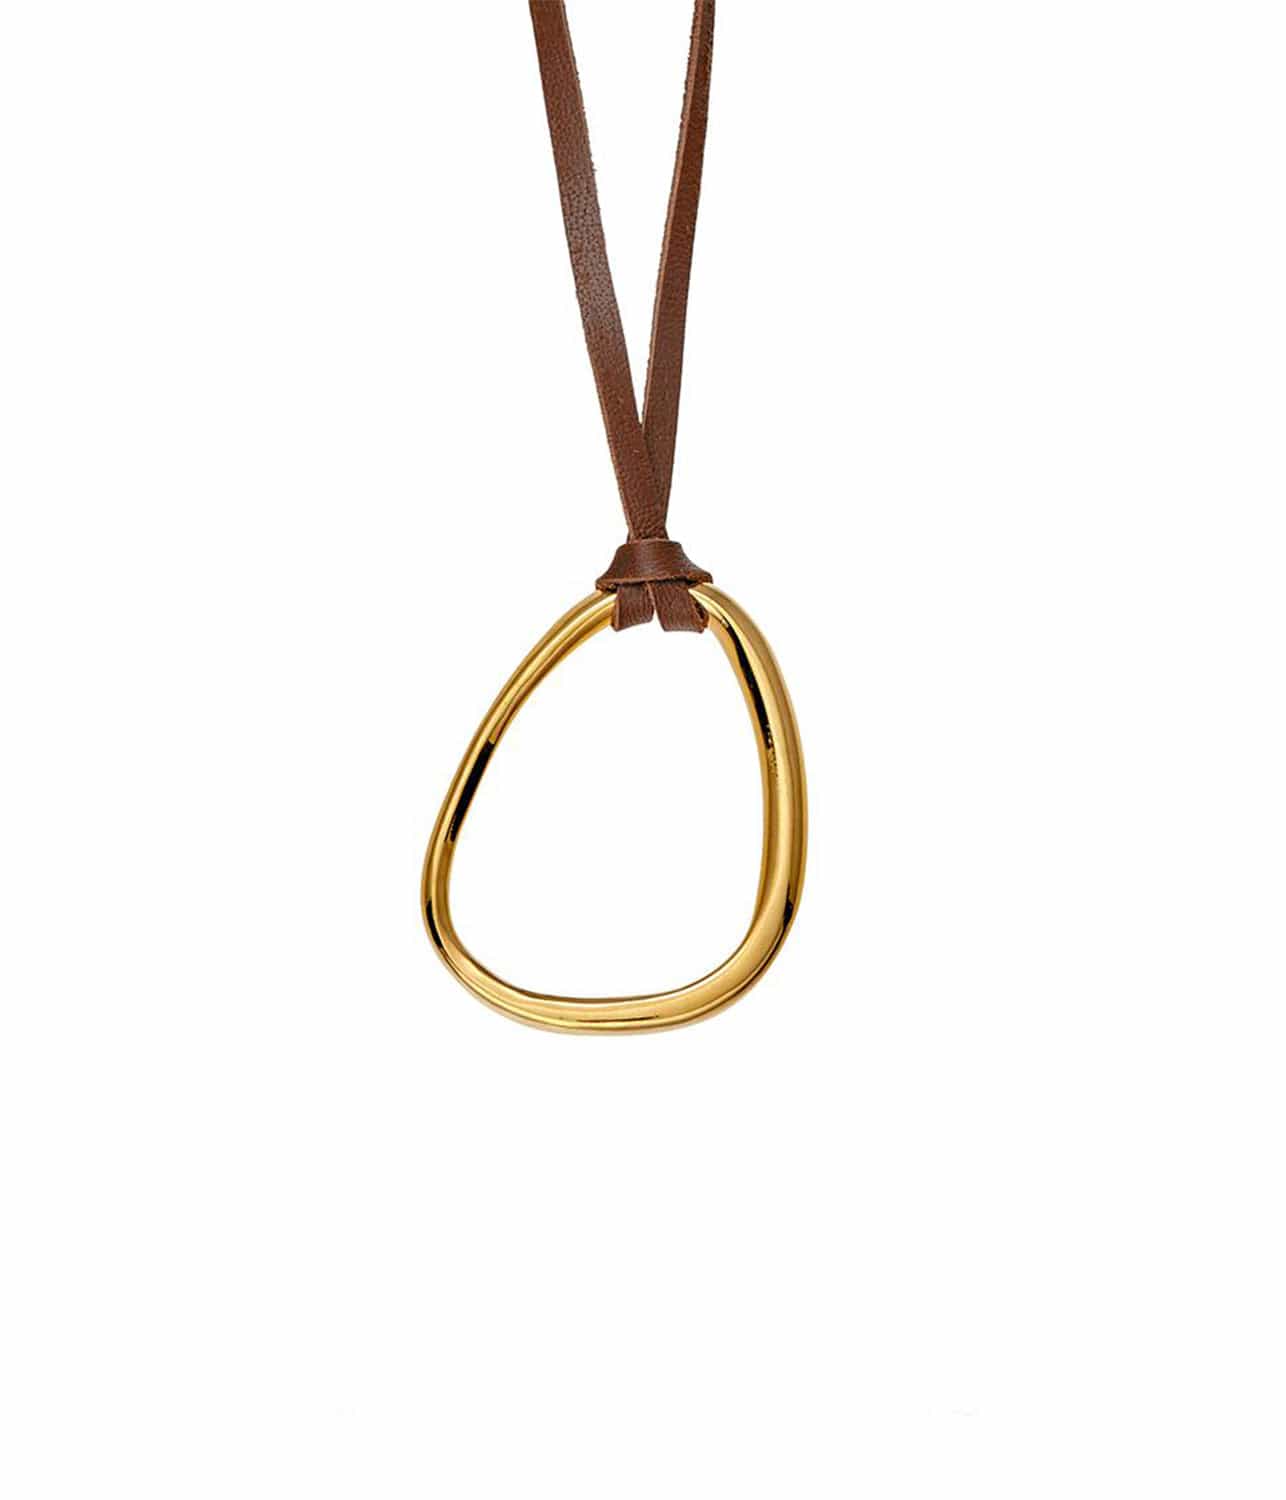 FLOW STATE NECKLACE - GOLD | HOLLY RYAN HOLLY RYAN FLOW STATE NECKLACE - GOLD